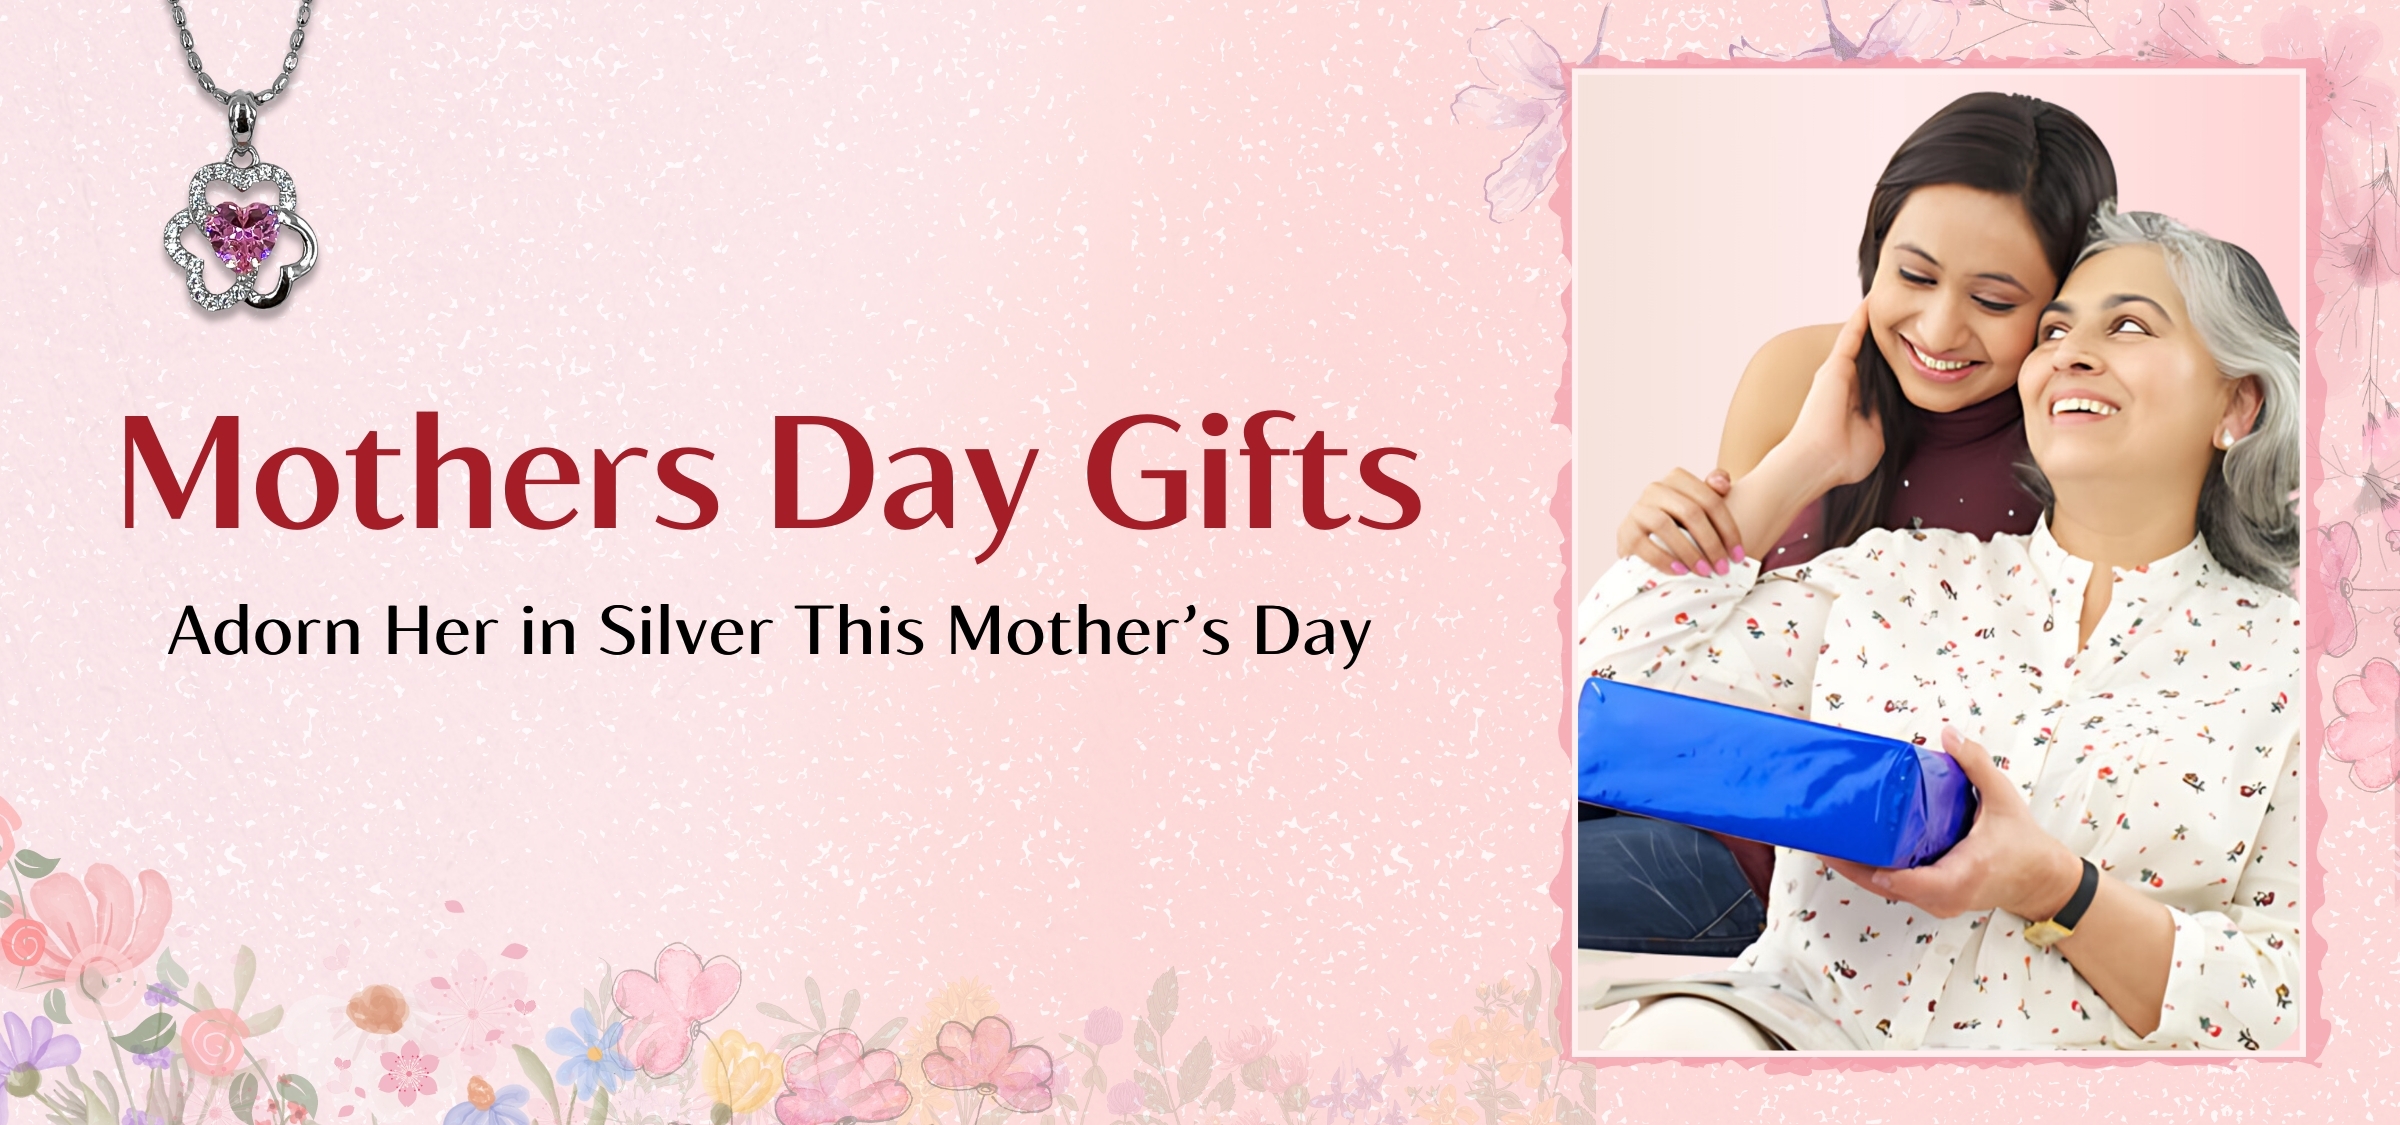 silver gift for mothers day.